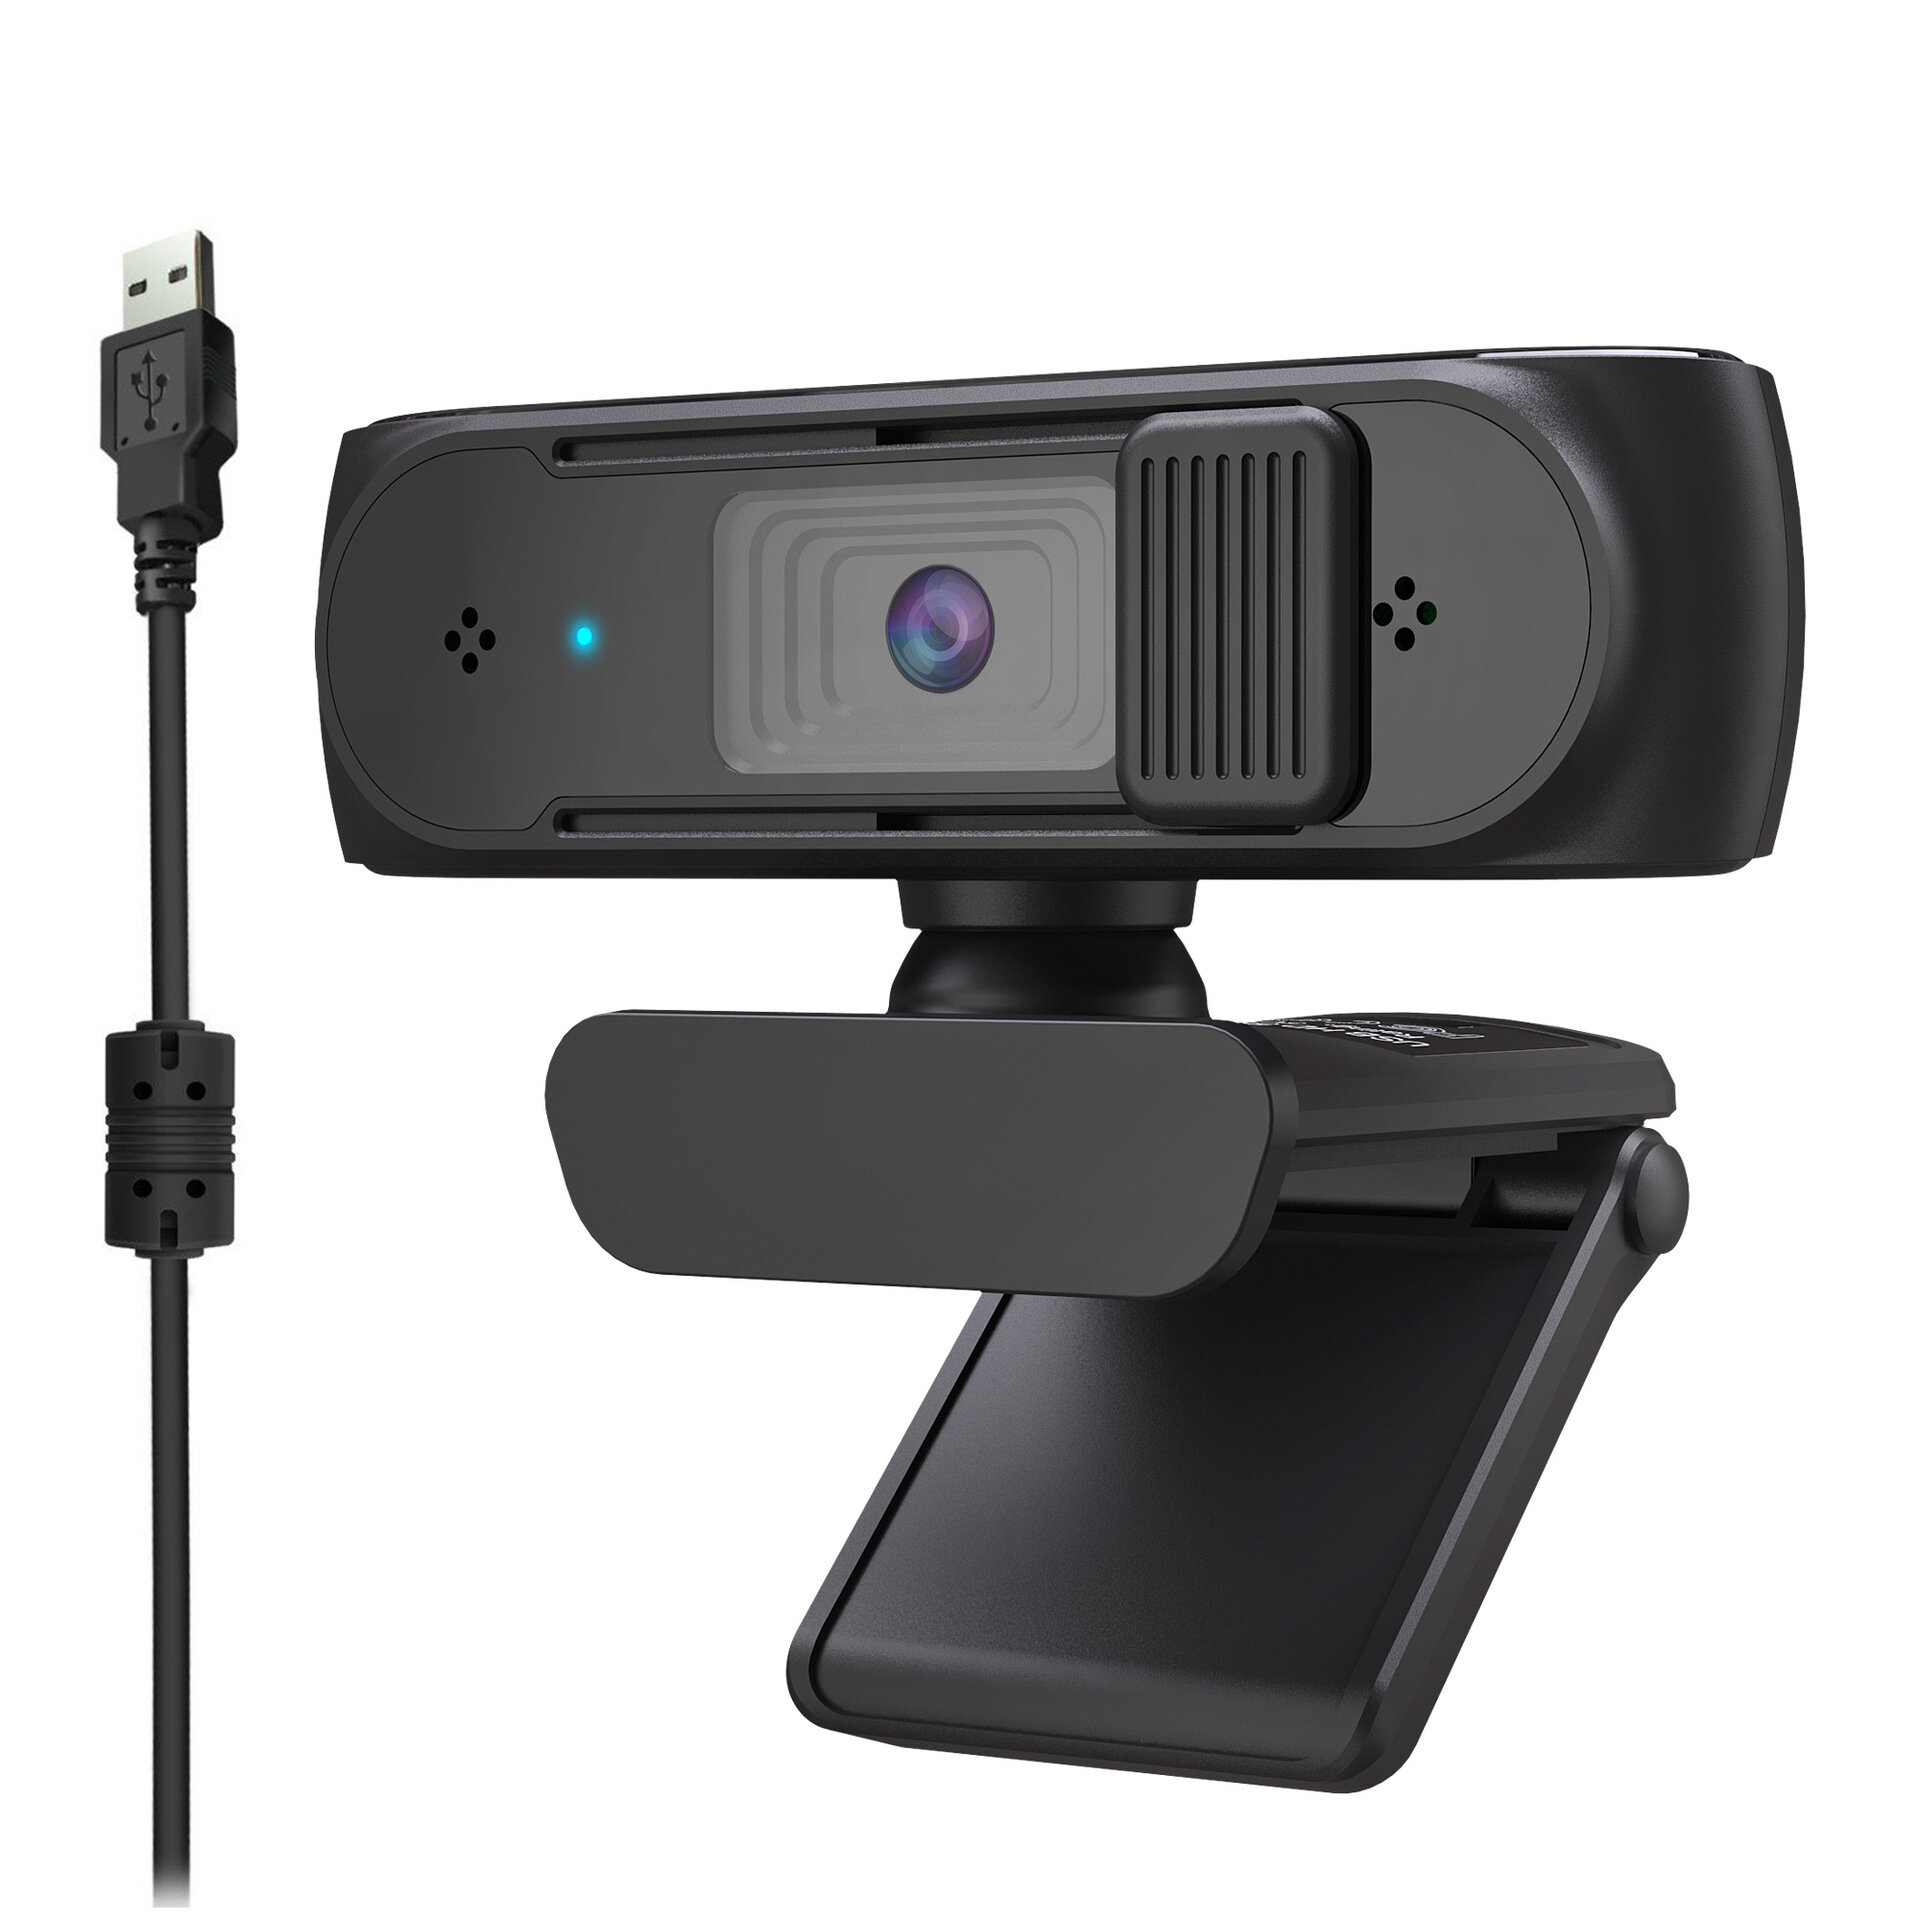 

Haokai K30 HD 5MP USB Webcam 77° Wide Angle Auto Focus Built-in Dual Mics with Privacy Cover Smart Web Cam YouTube Video